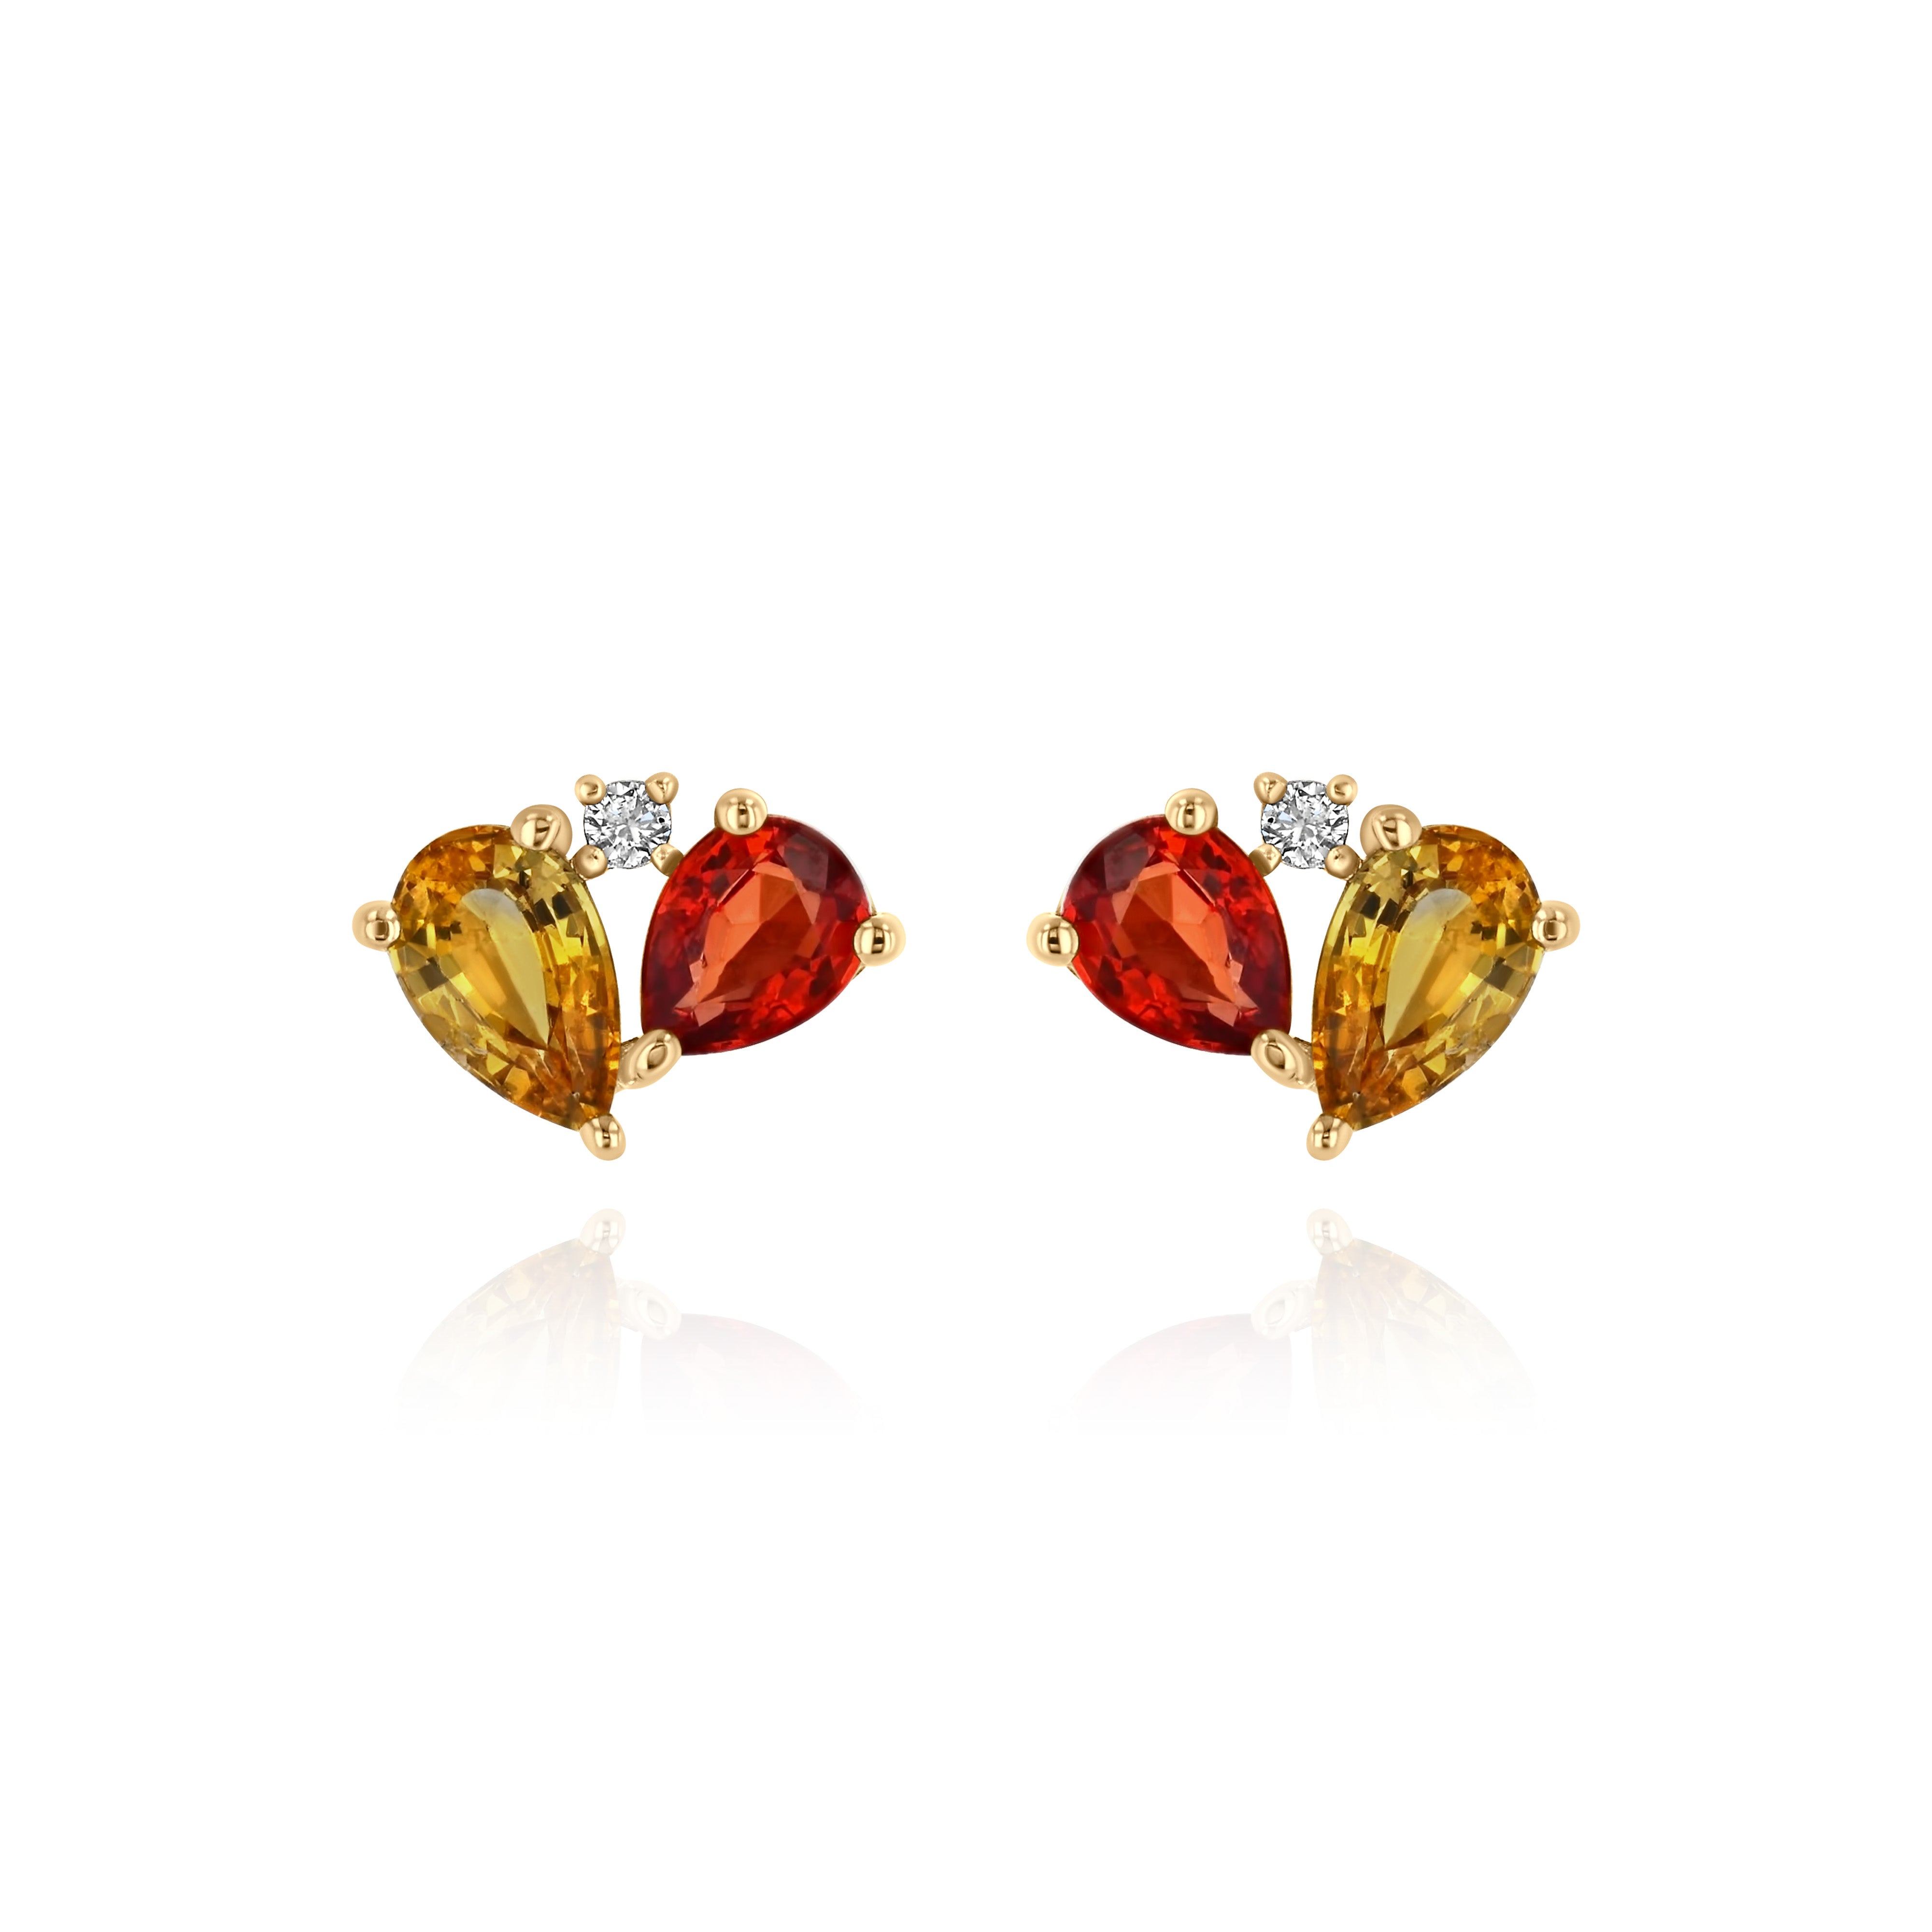 Yellow Gold Earrings with pear shaped Orange and Yellow Sapphire, and a small round Diamond, Small